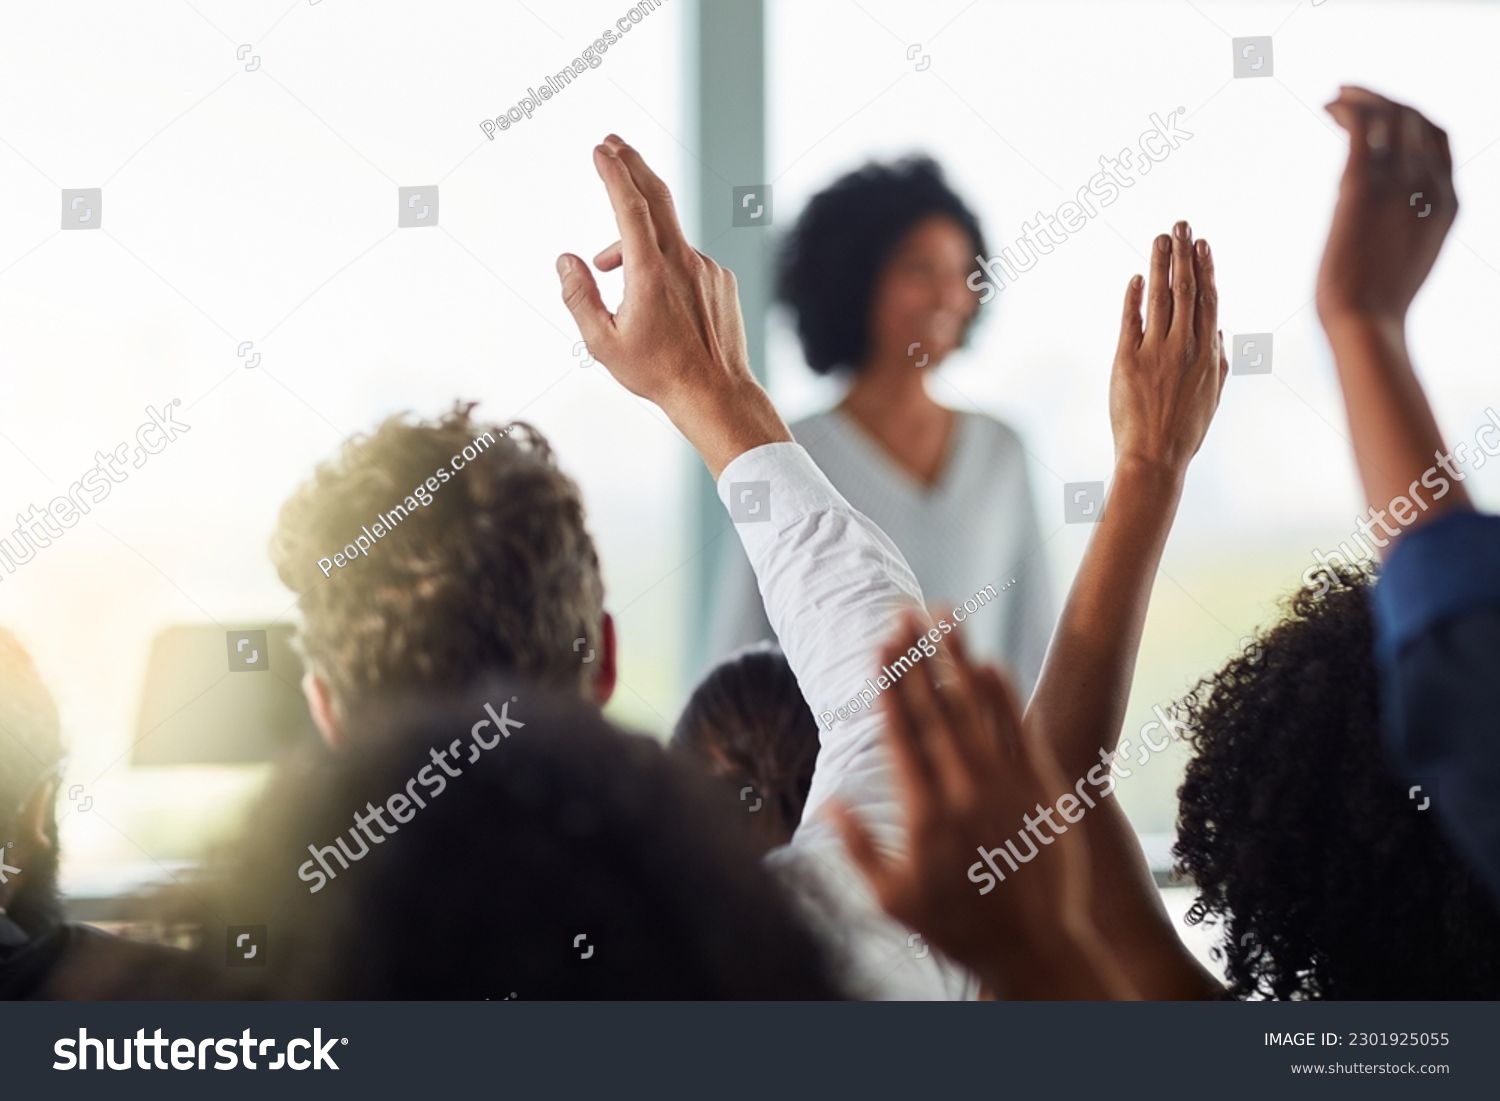 Back, business people and hands raised for questions at conference, seminar or meeting. Group, audience and hand up for question, asking or answer, crowd vote and training at workshop presentation. #2301925055